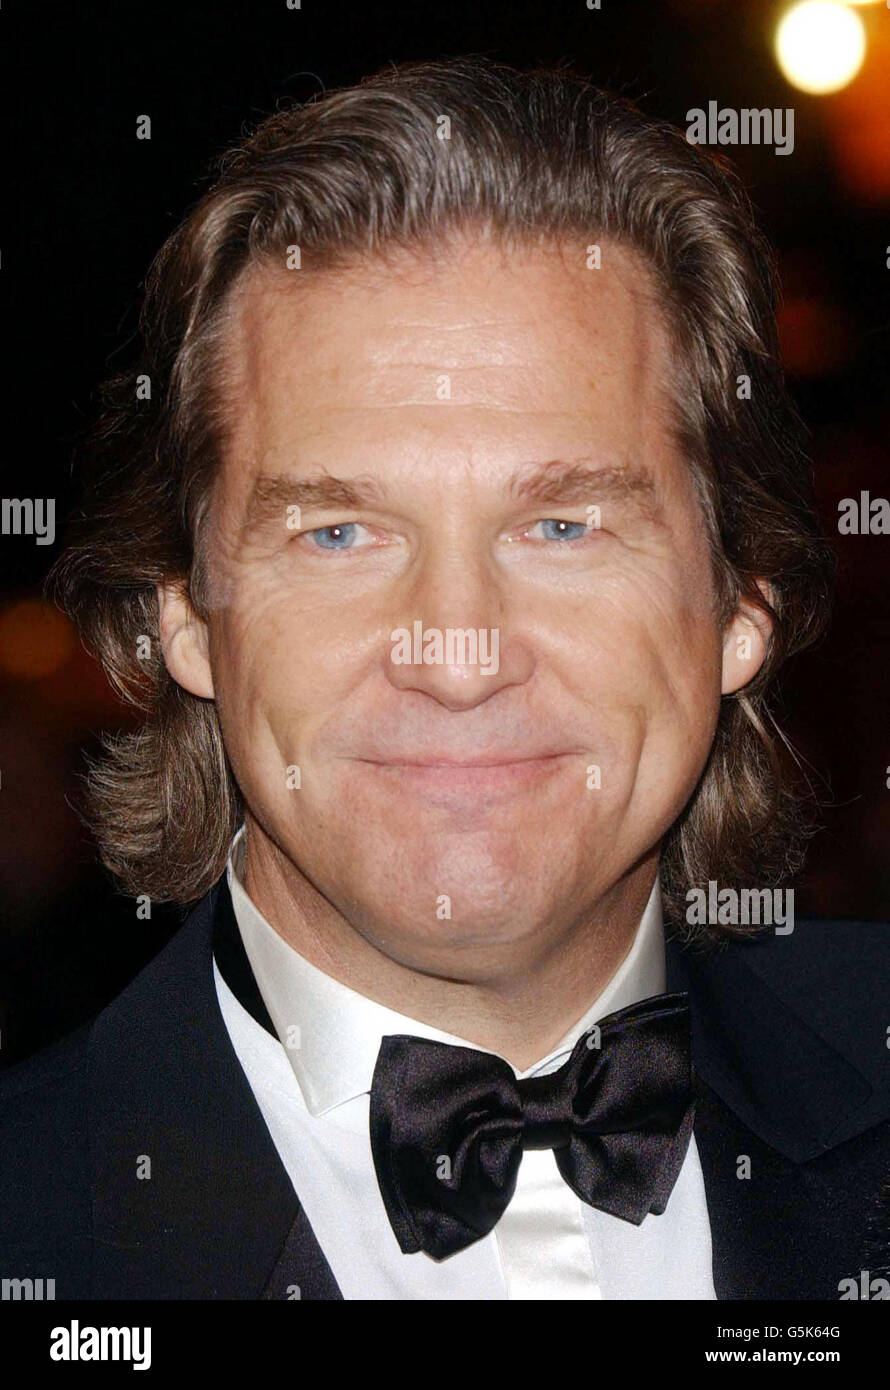 UA actor Jeff Bridges arrives for the London Film Festival's closing gala premiere of his new film K-Pax at the Empire in Leicester Square, London. The film follows the story of a mysterious hospital patient who claims to be from another planet. Stock Photo